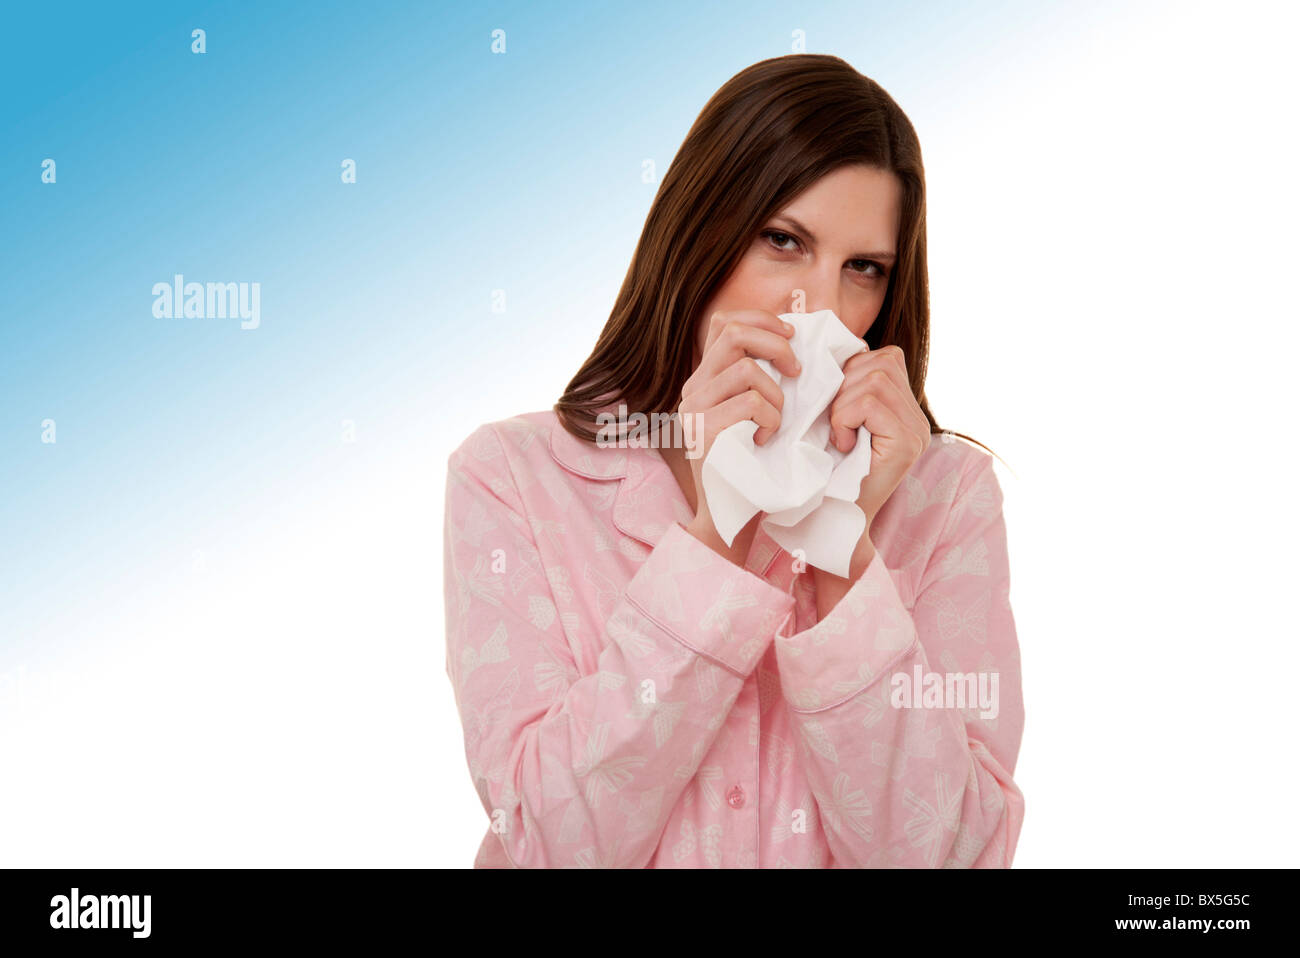 Woman blowing son nez wearing pajamas Banque D'Images